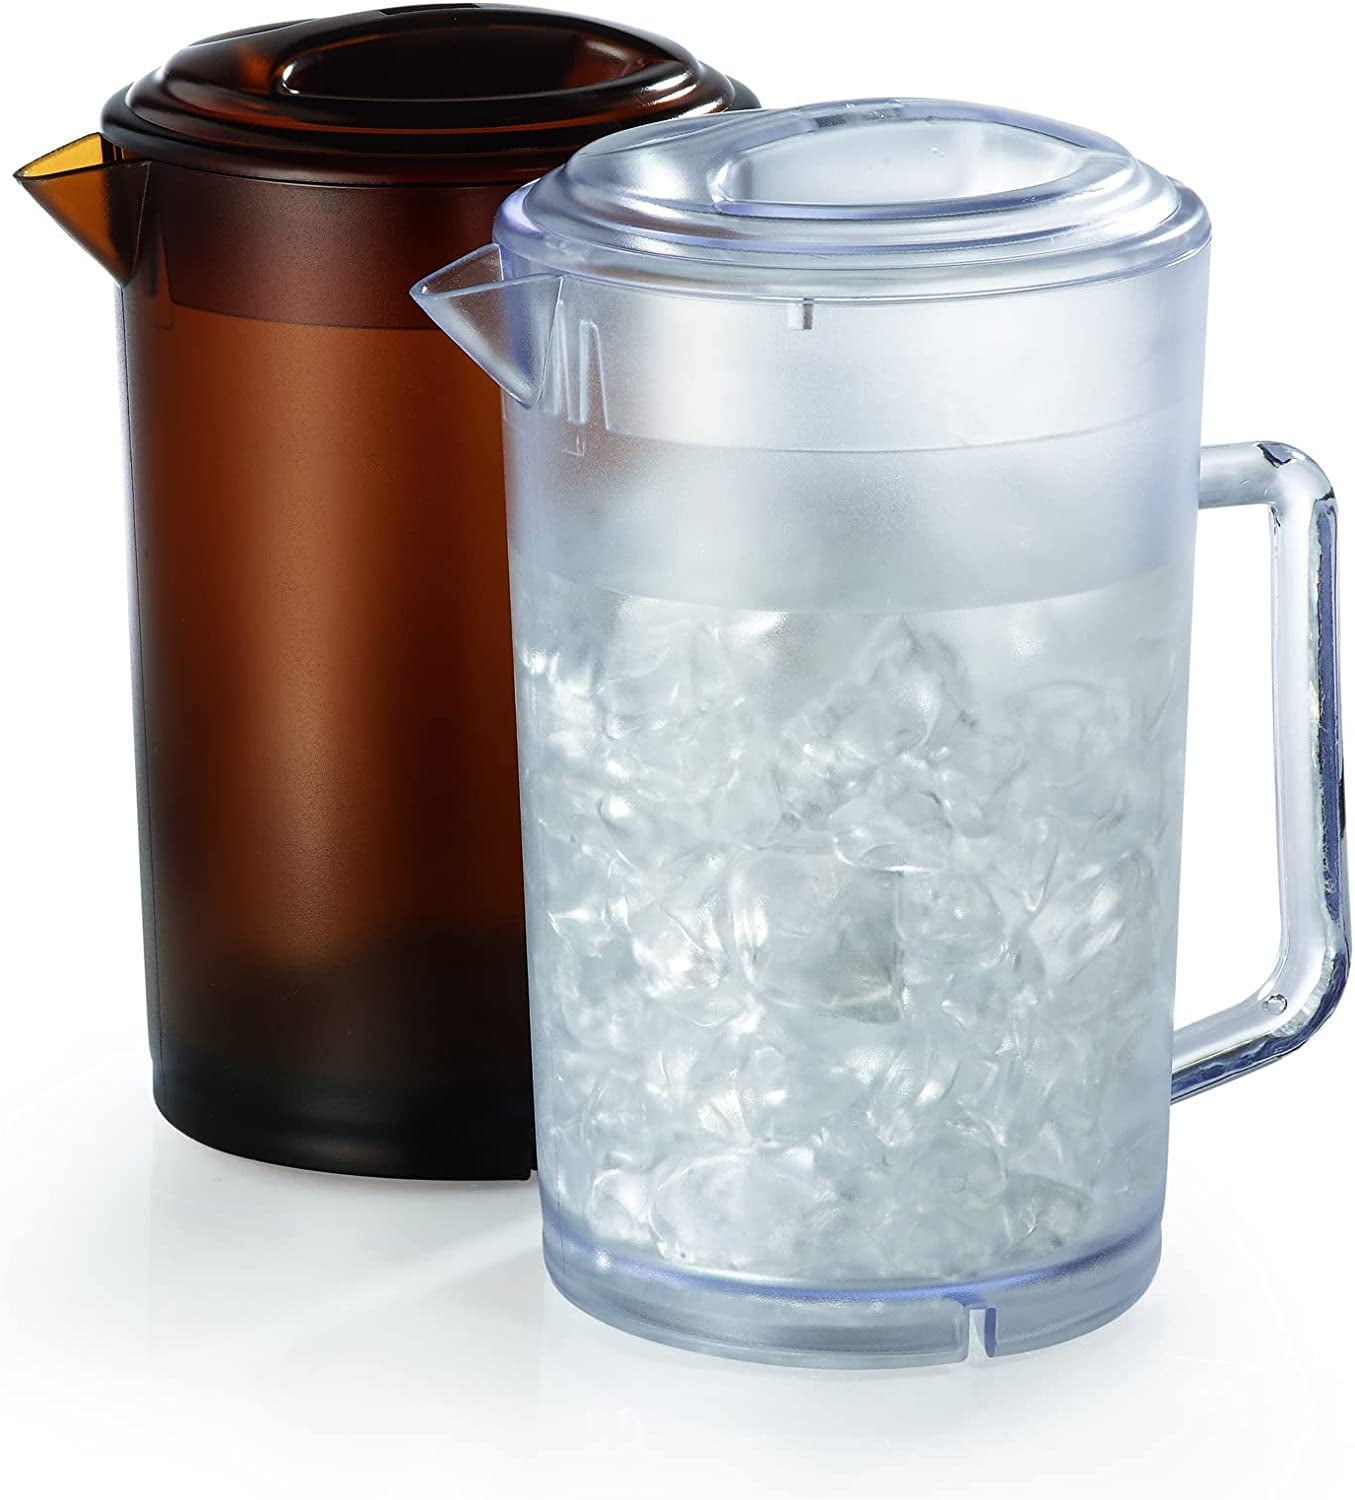 G.E.T. Heavy-Duty Shatterproof Plastic Iced Tea 2 Quart Pitcher with Lid  (64 Ounce), BPA Free, Amber 